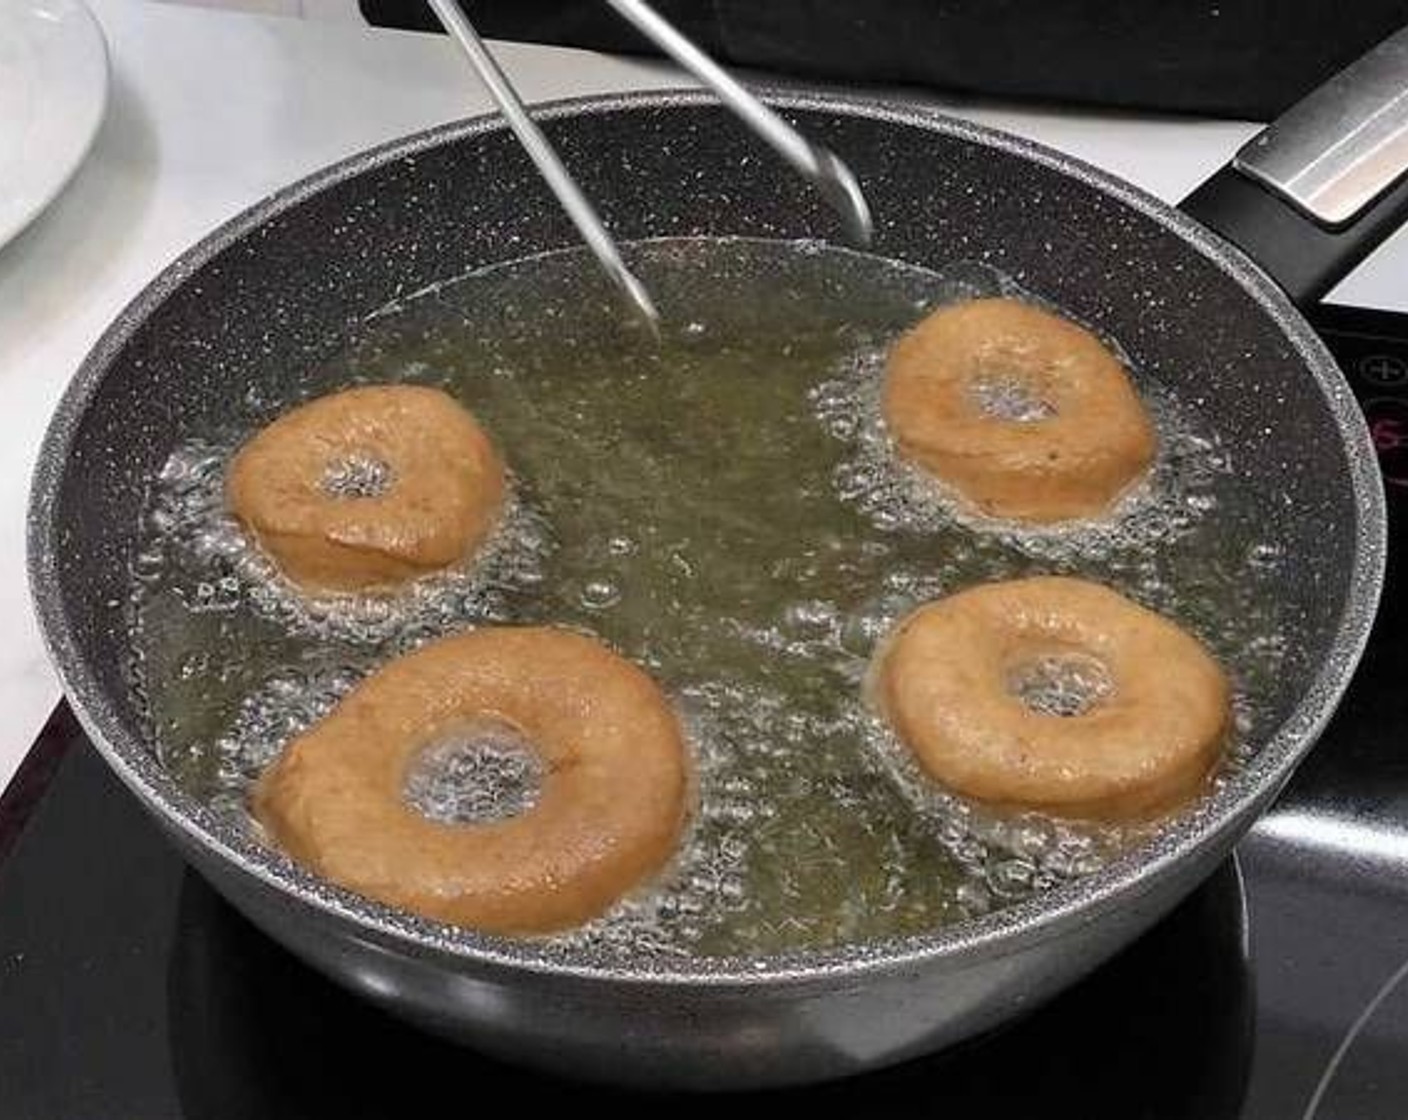 step 8 In a pan add Frying Oil (as needed) and heat on medium heat. Once the oil is hot, fry the donuts. Once golden brown flip and fry the other side.